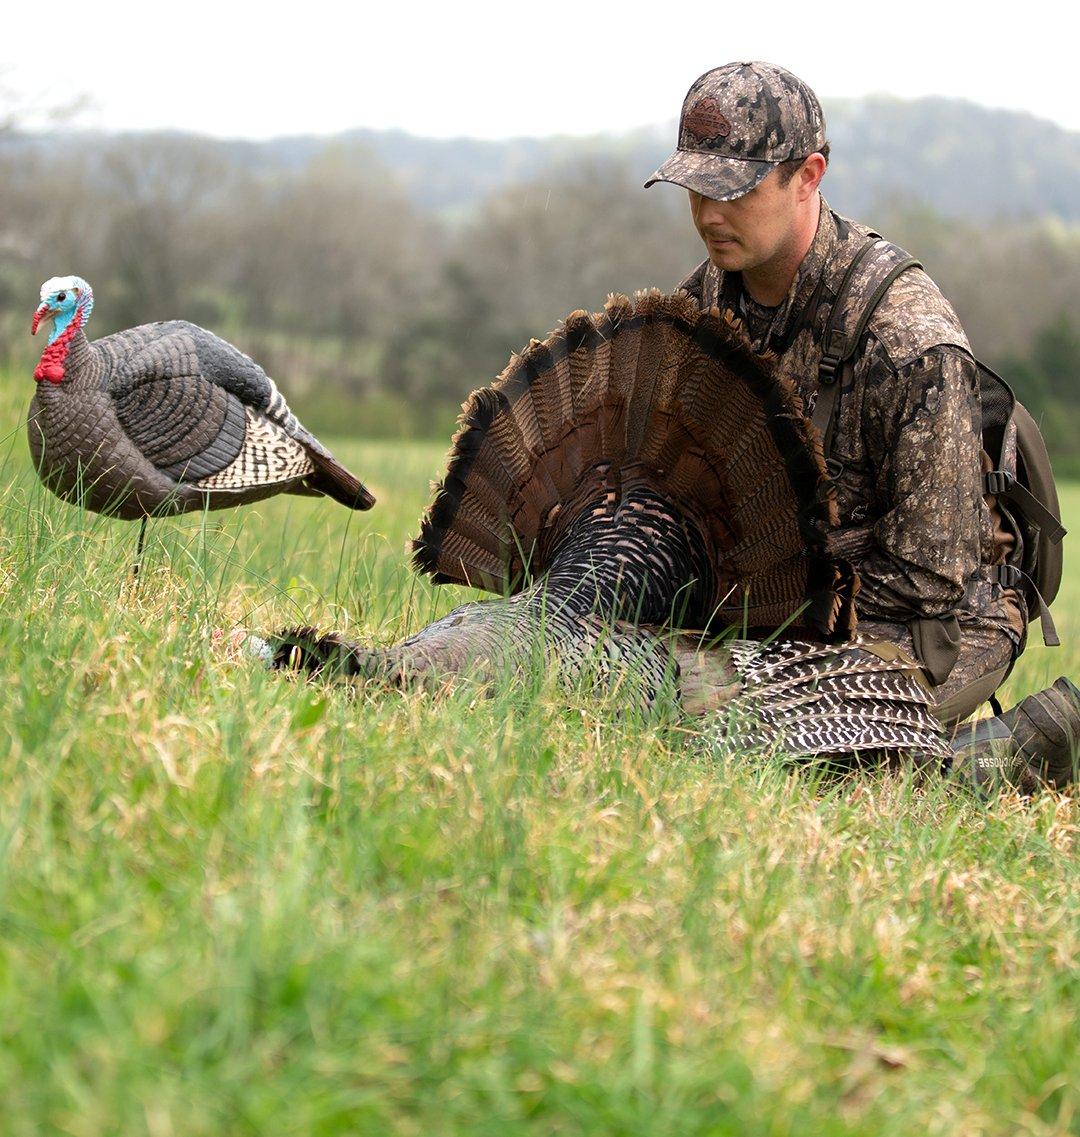 Jordan with the results of a good decoy set. Image by Realtree/Tyler Jordan